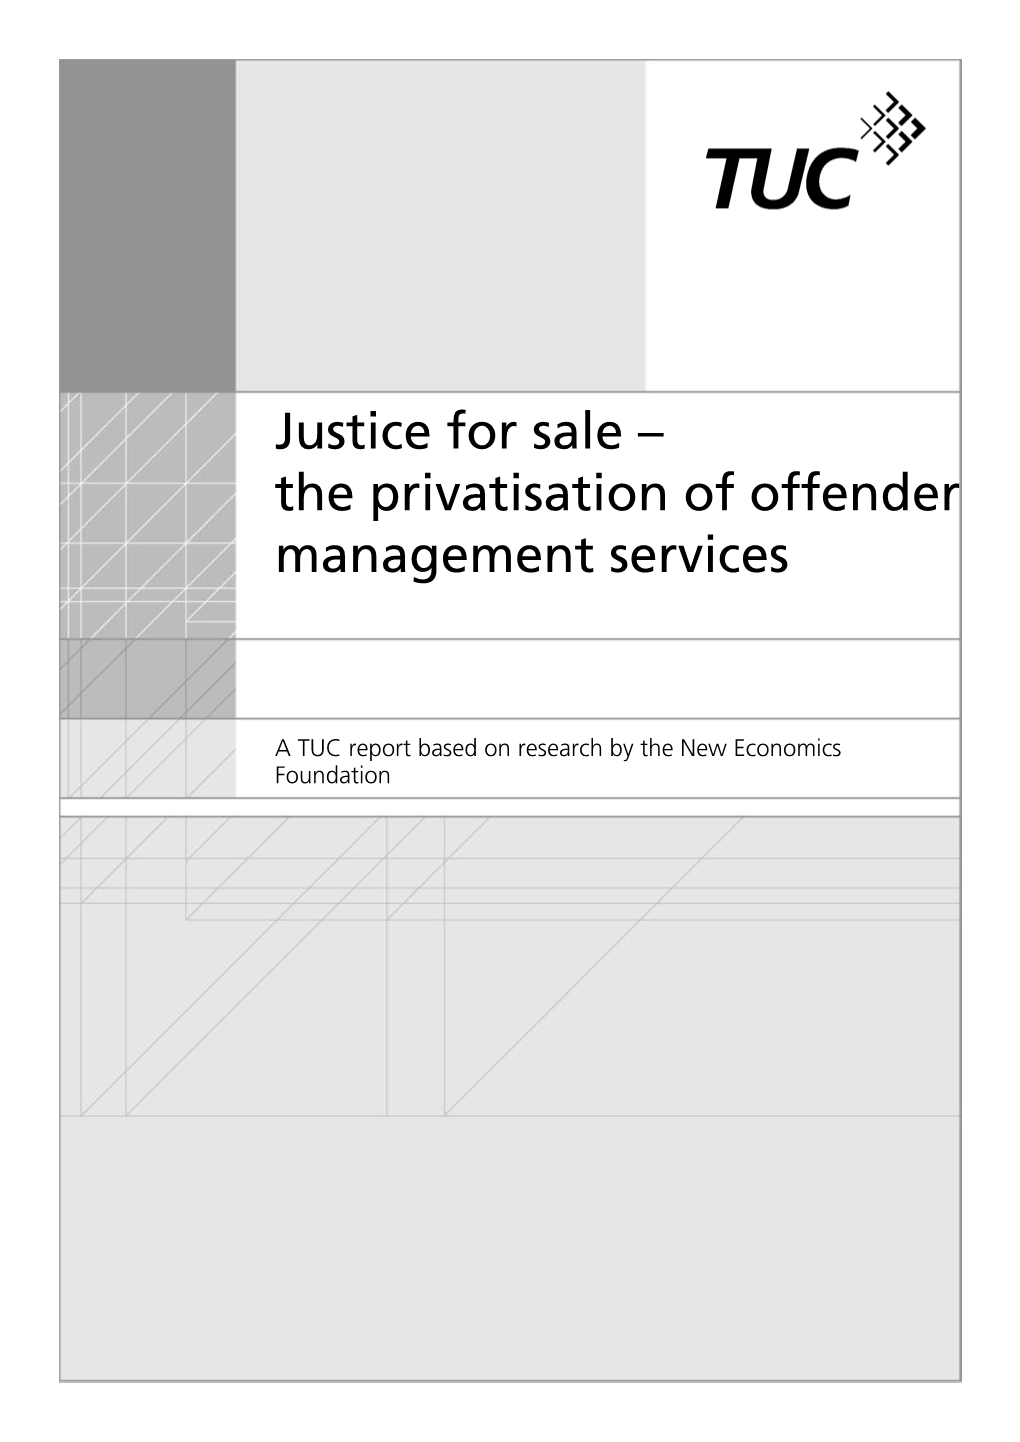 Justice for Sale – the Privatisation of Offender Management Services